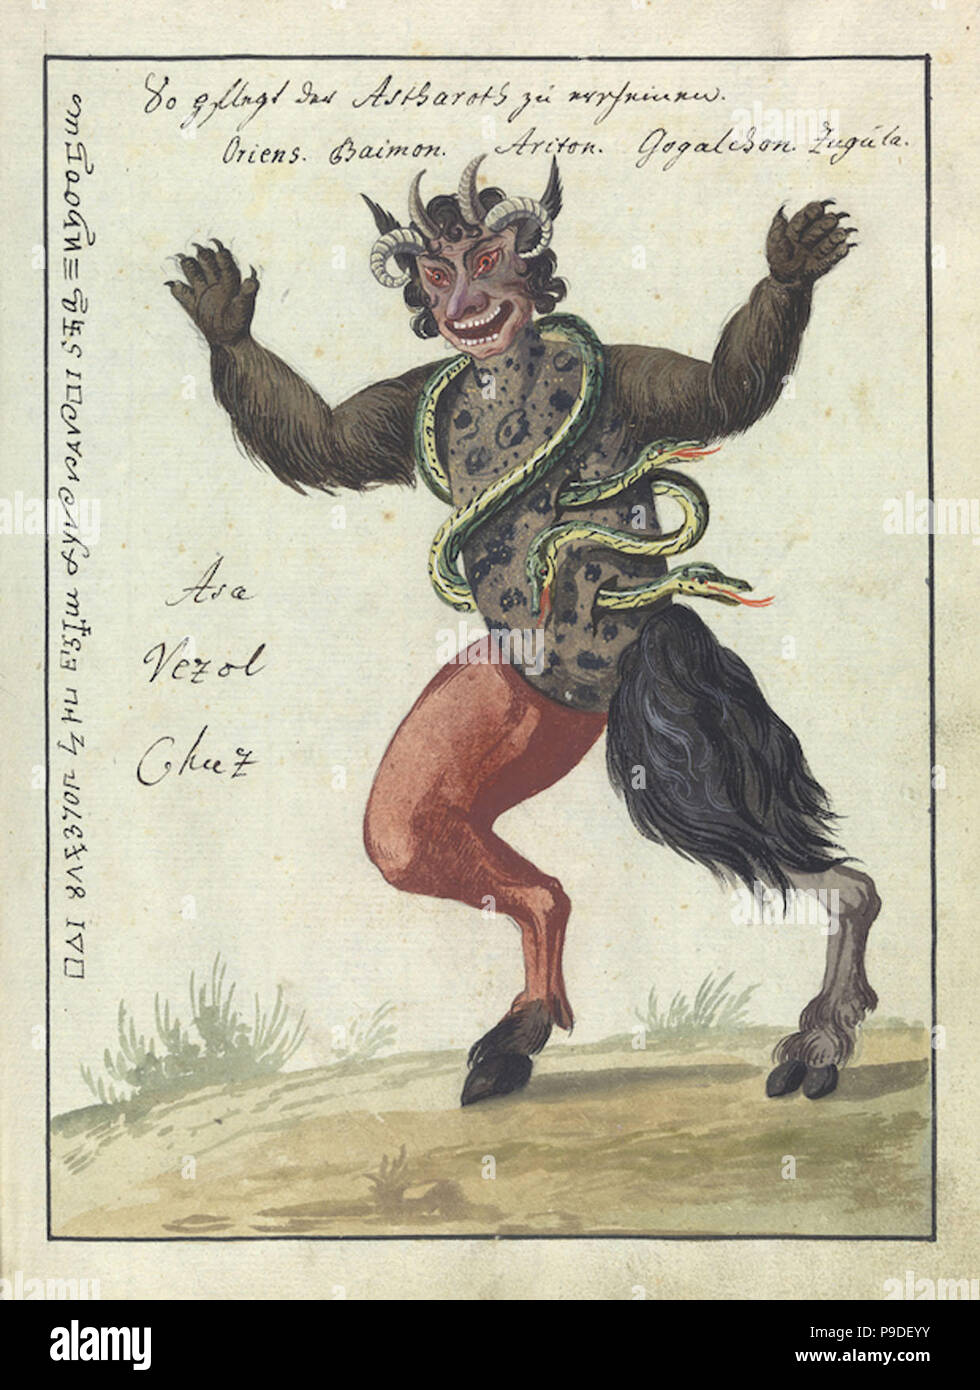 vintage illustration from a book of black magic Stock Photo